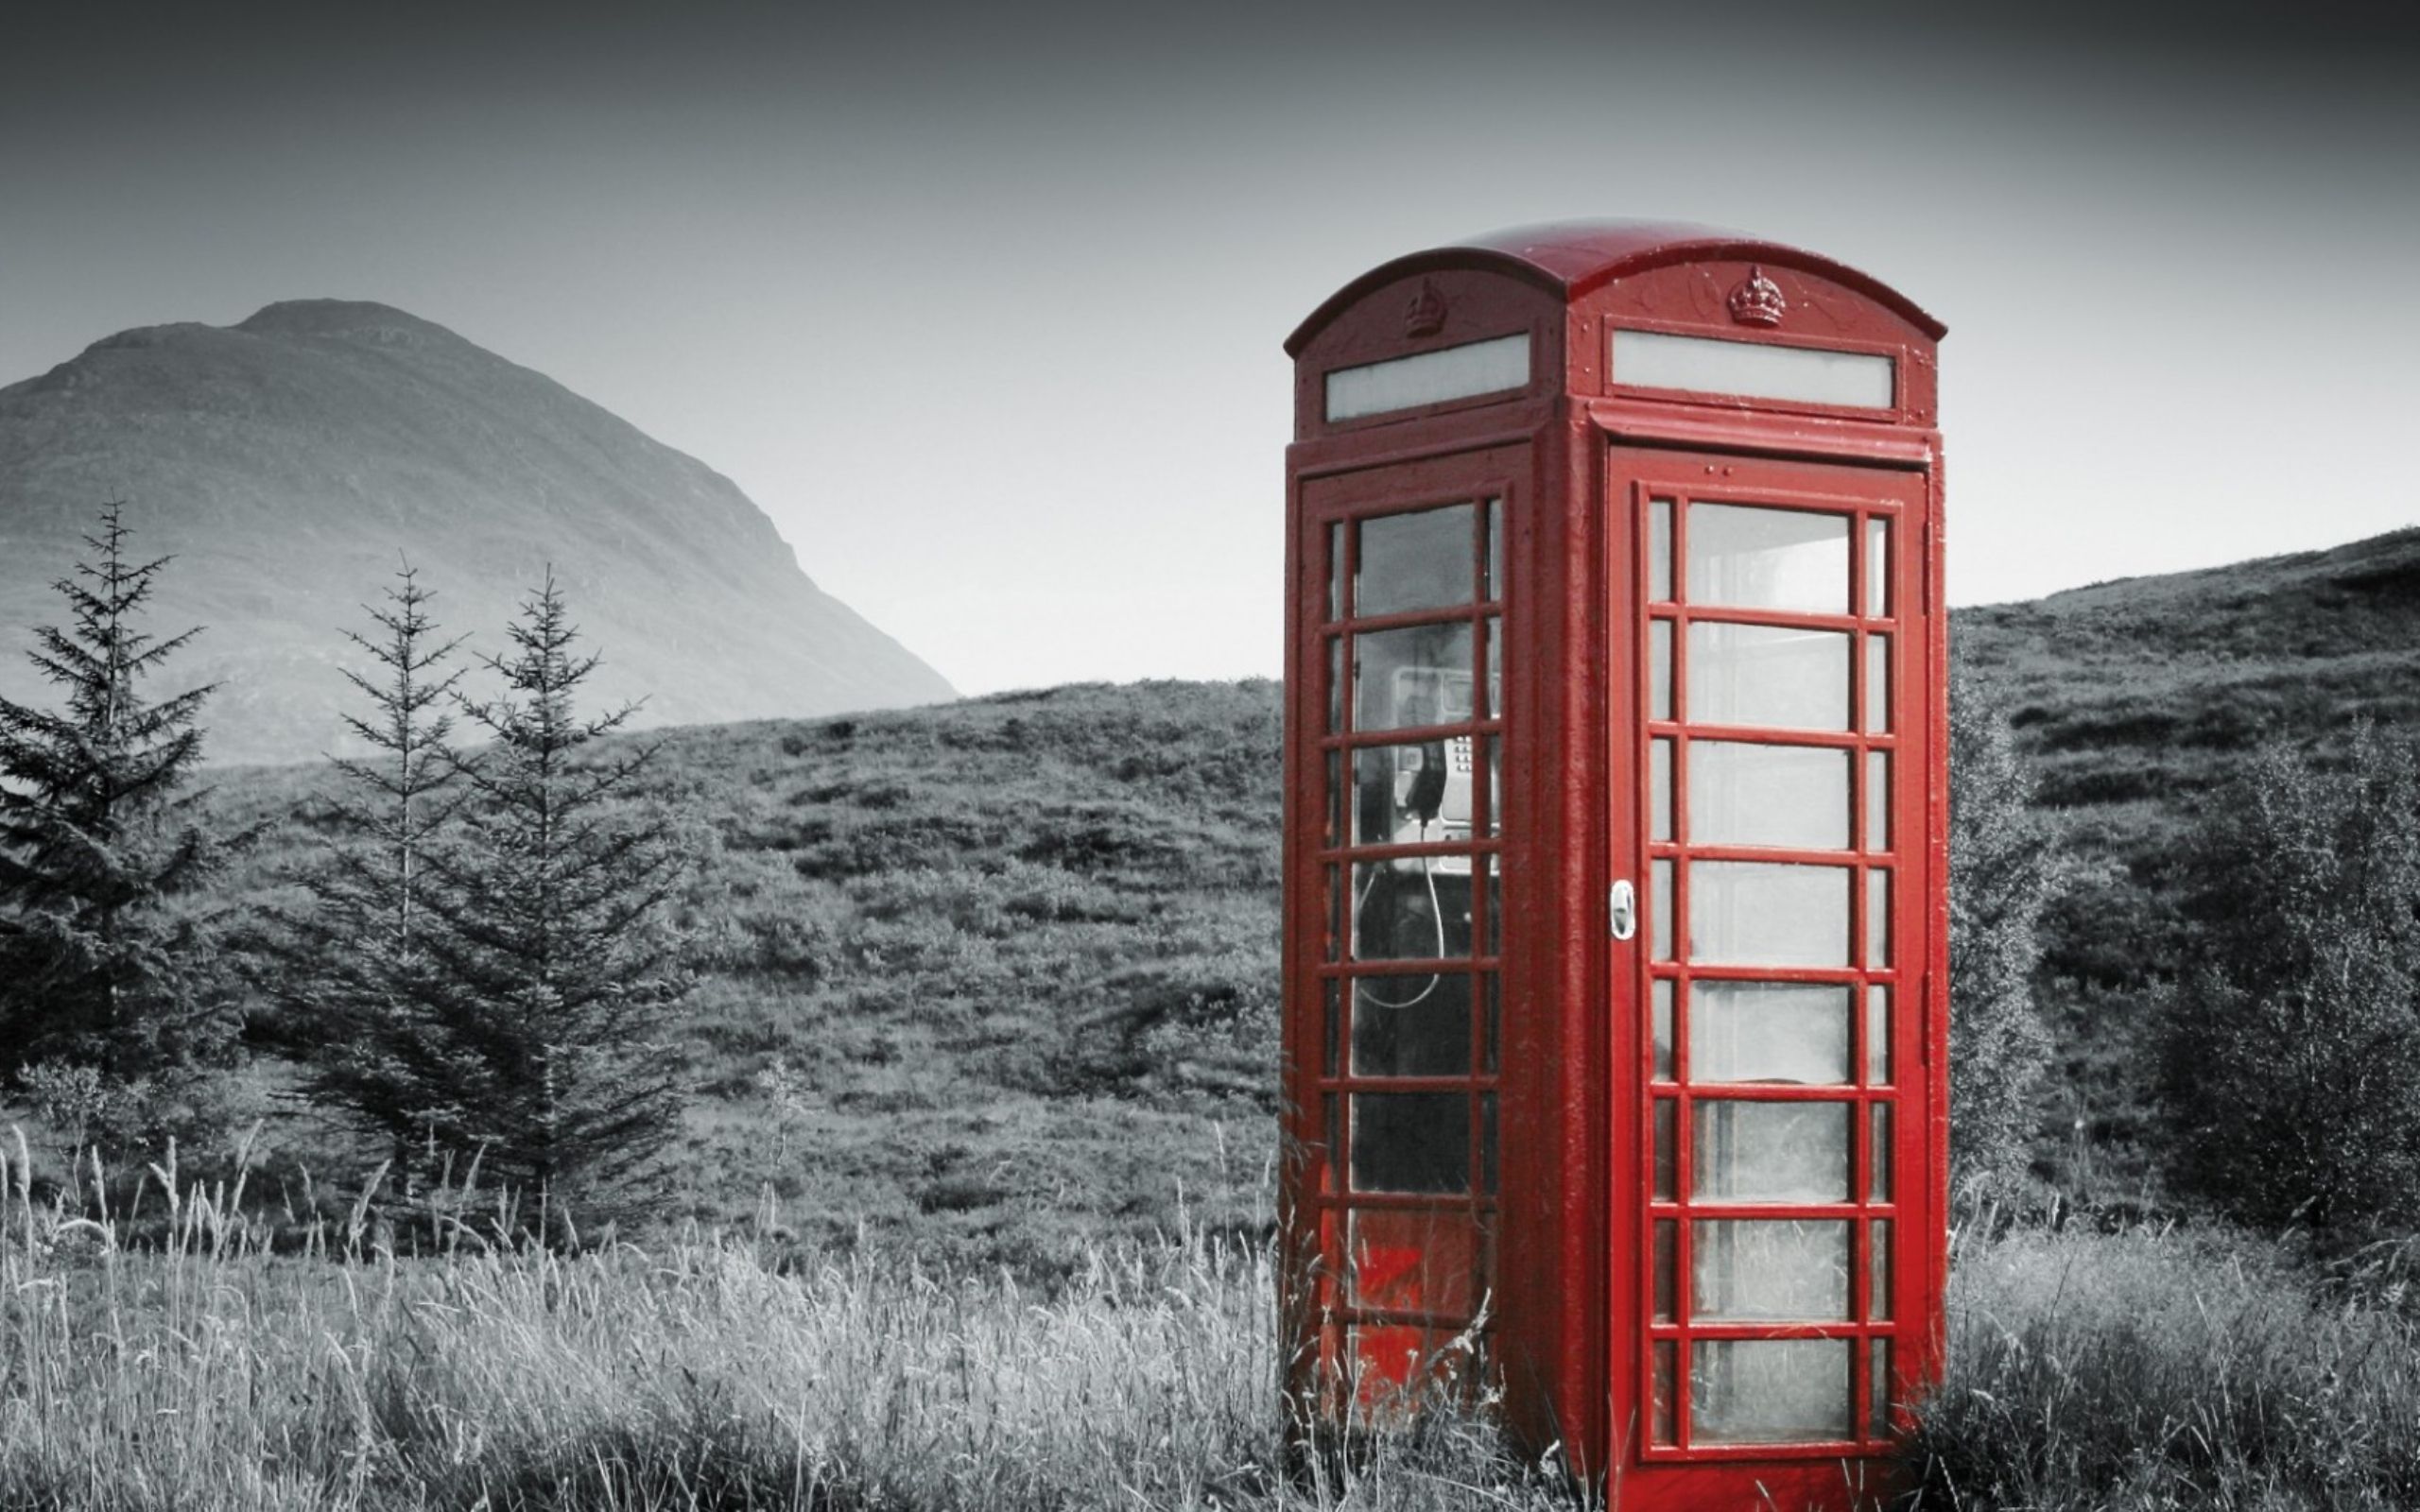 Telephone Booth Wallpaper. Photobooth Wallpaper, Phone Booth Wallpaper and Telephone Booth Wallpaper